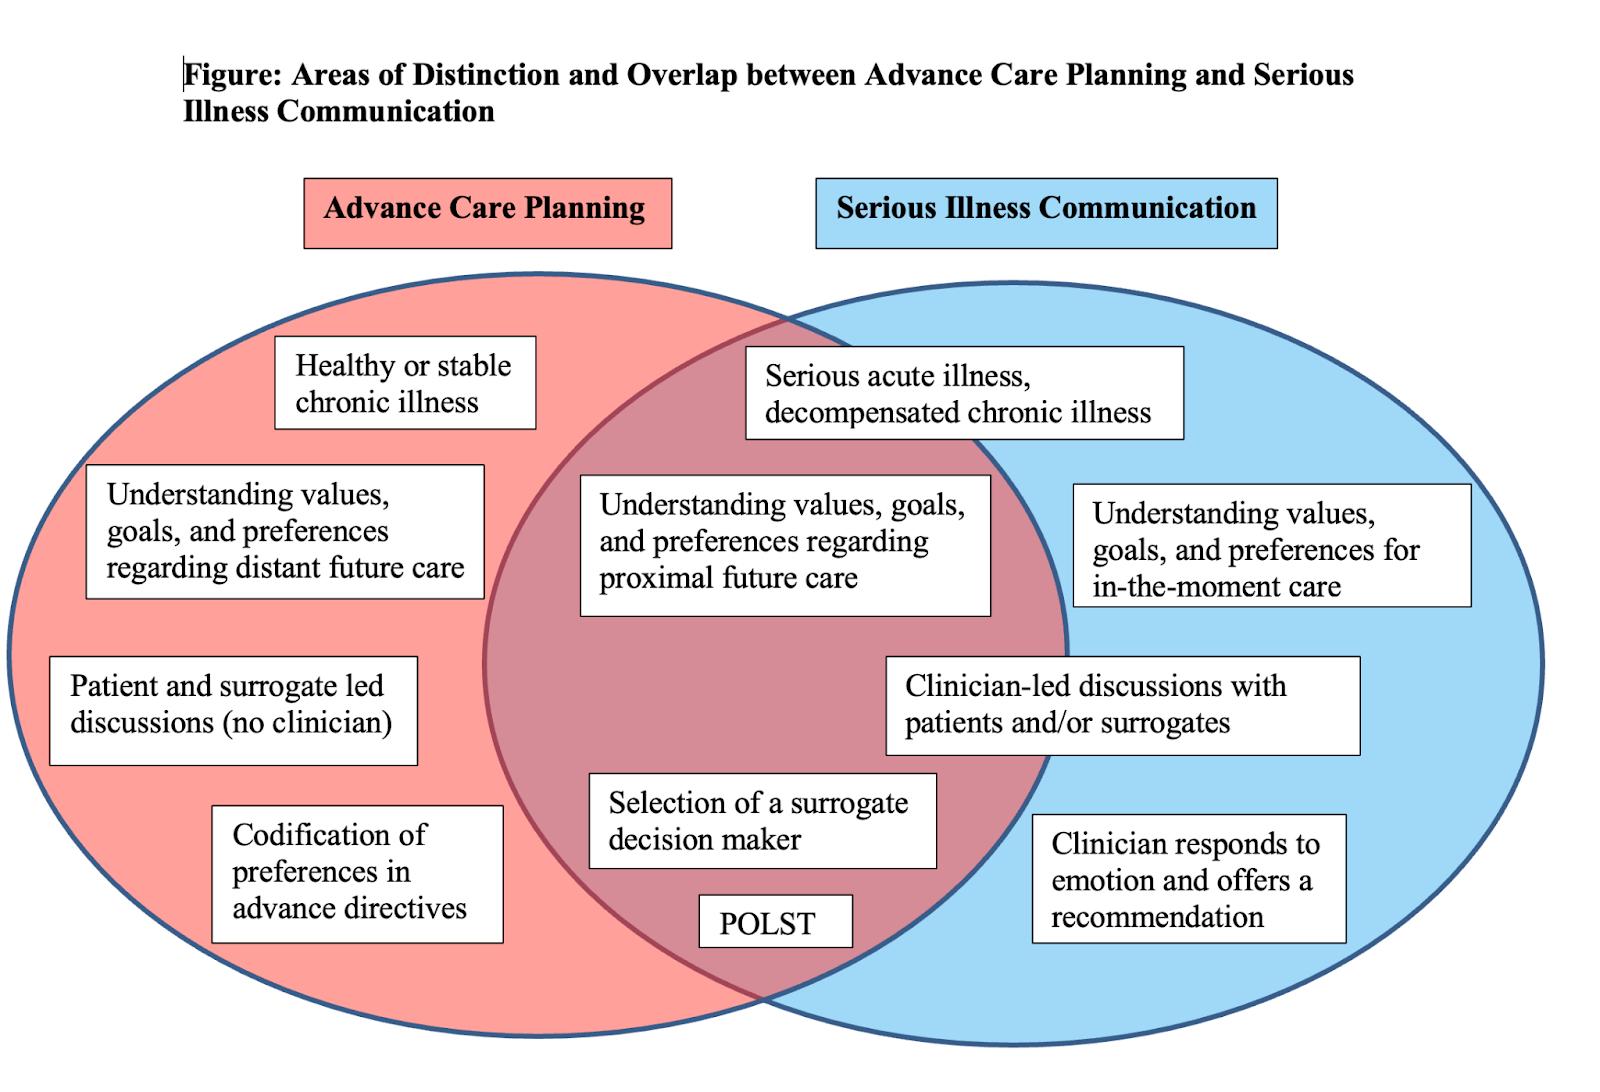 Should We Shift from Advance Care Planning to Serious Illness Communication?